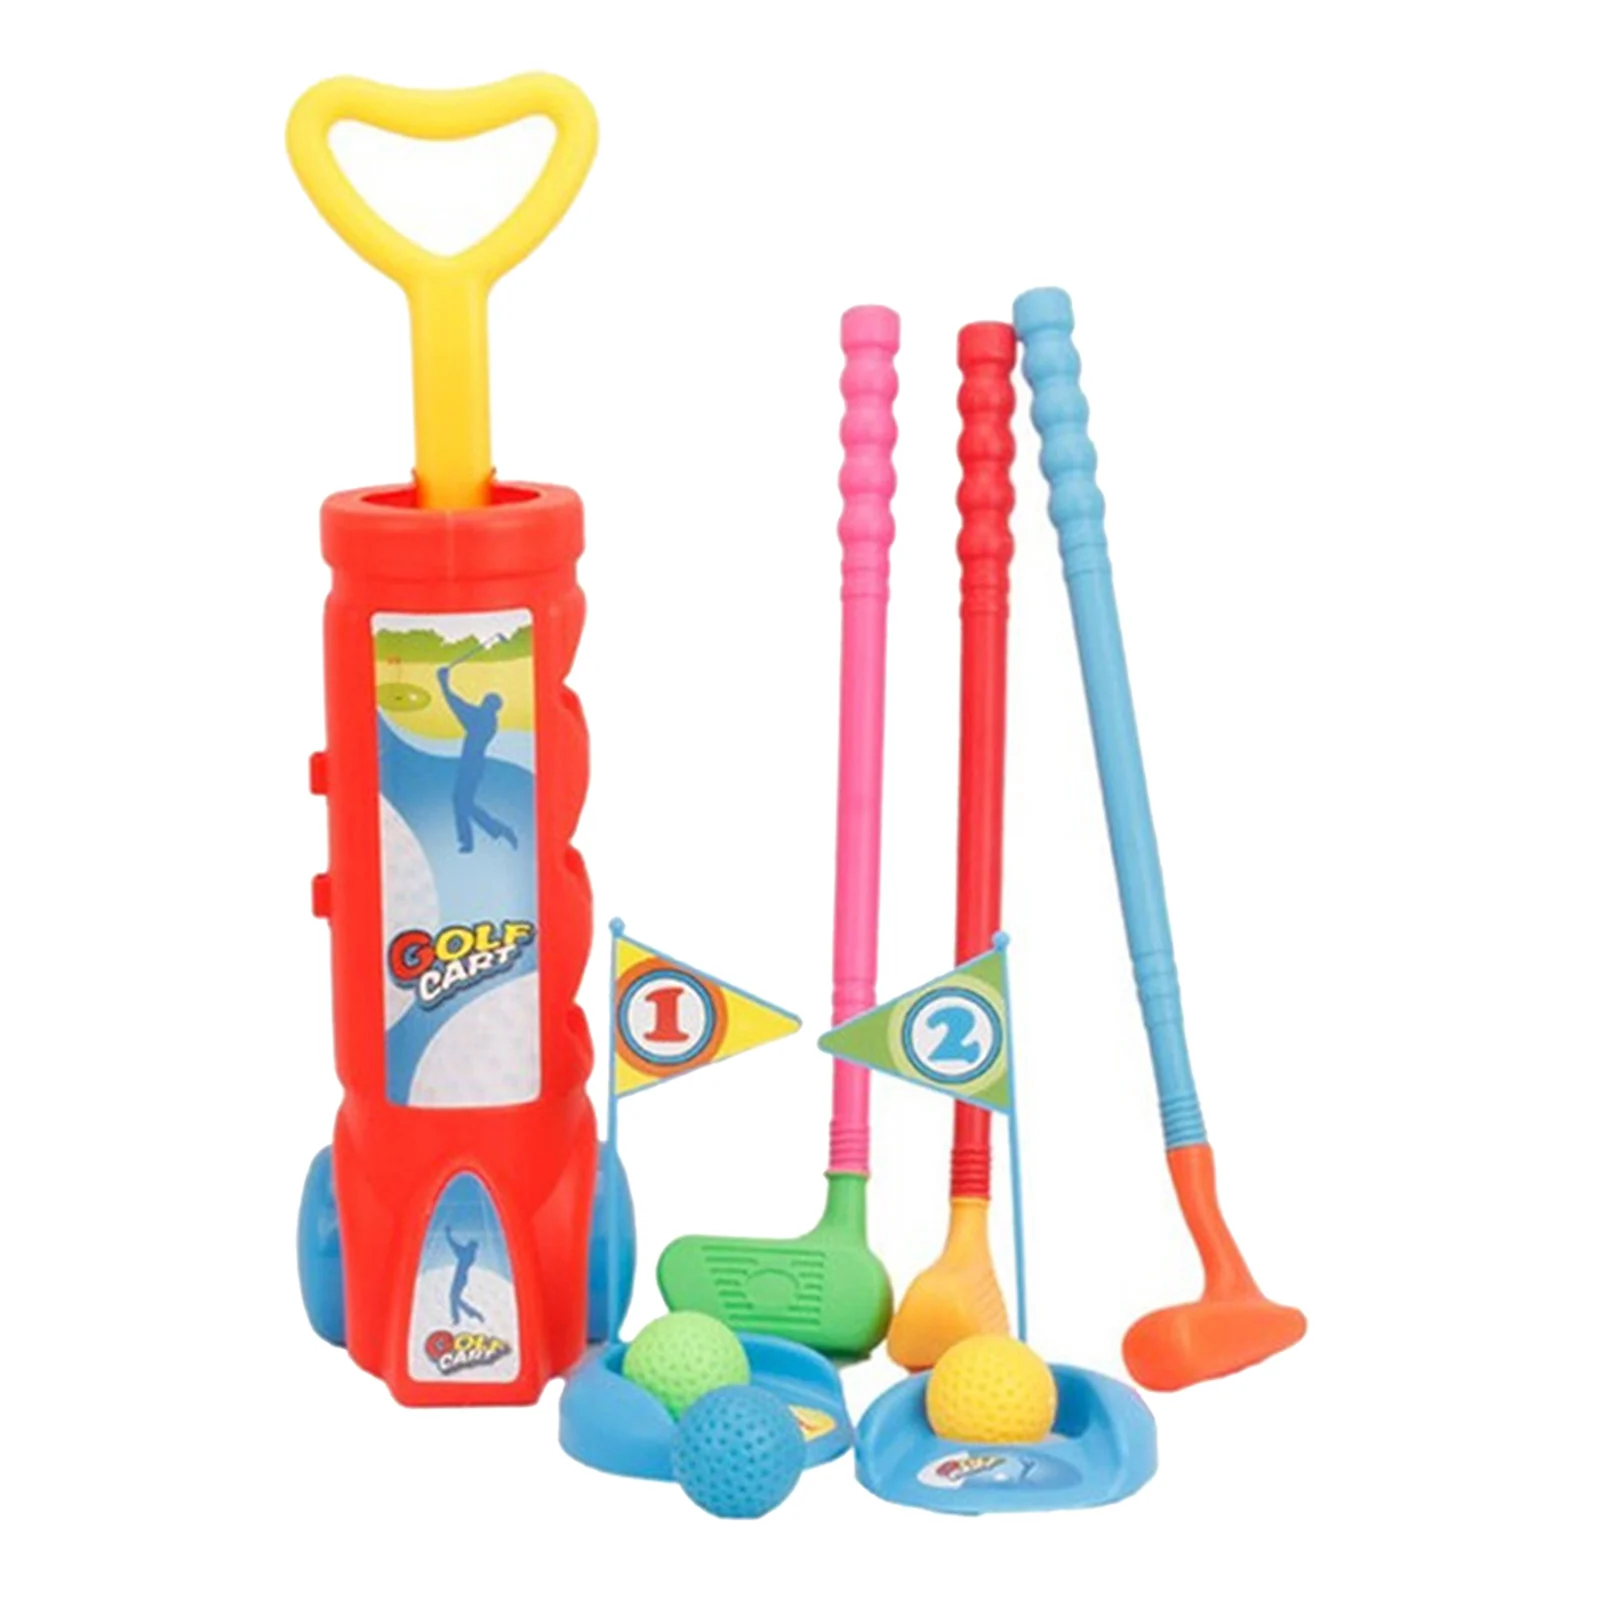 1 Set Child Golfer Sports Game Mini Plastic Toy Kids Children Pro Home Outdoor Indoor Small Golfs Training Club Party